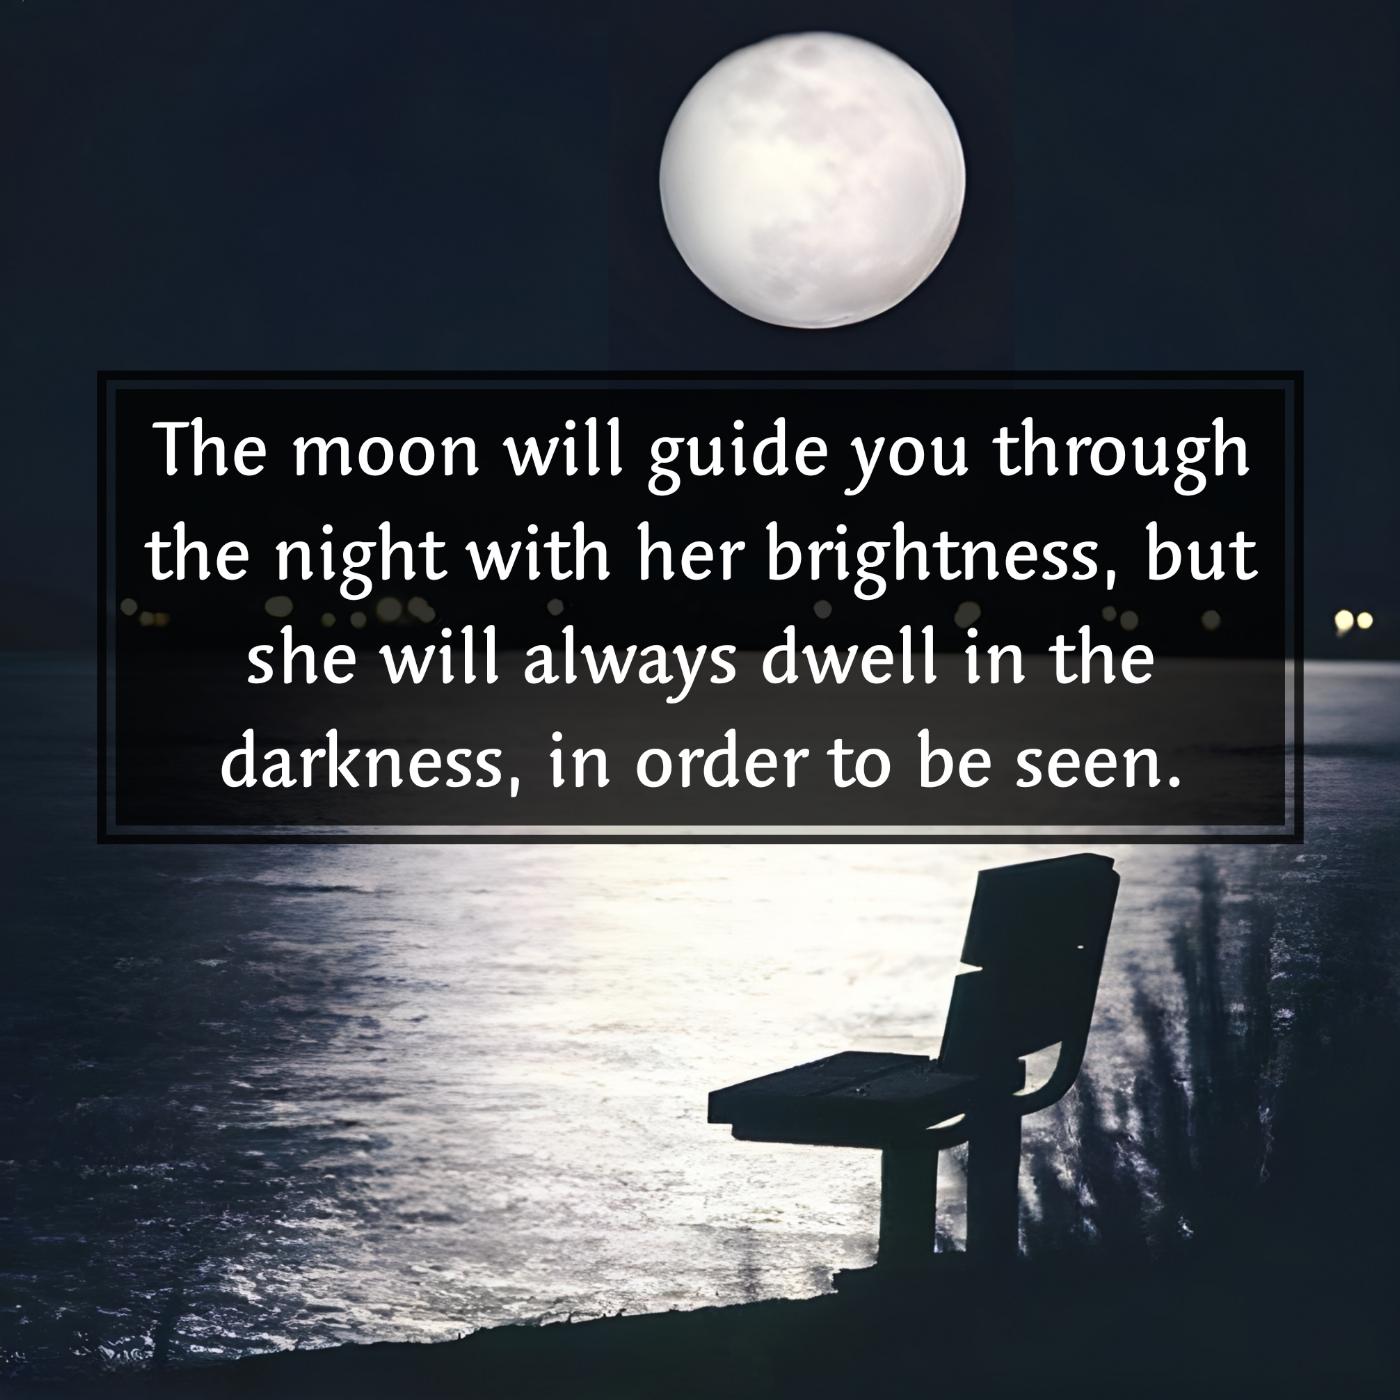 The moon will guide you through the night with her brightness